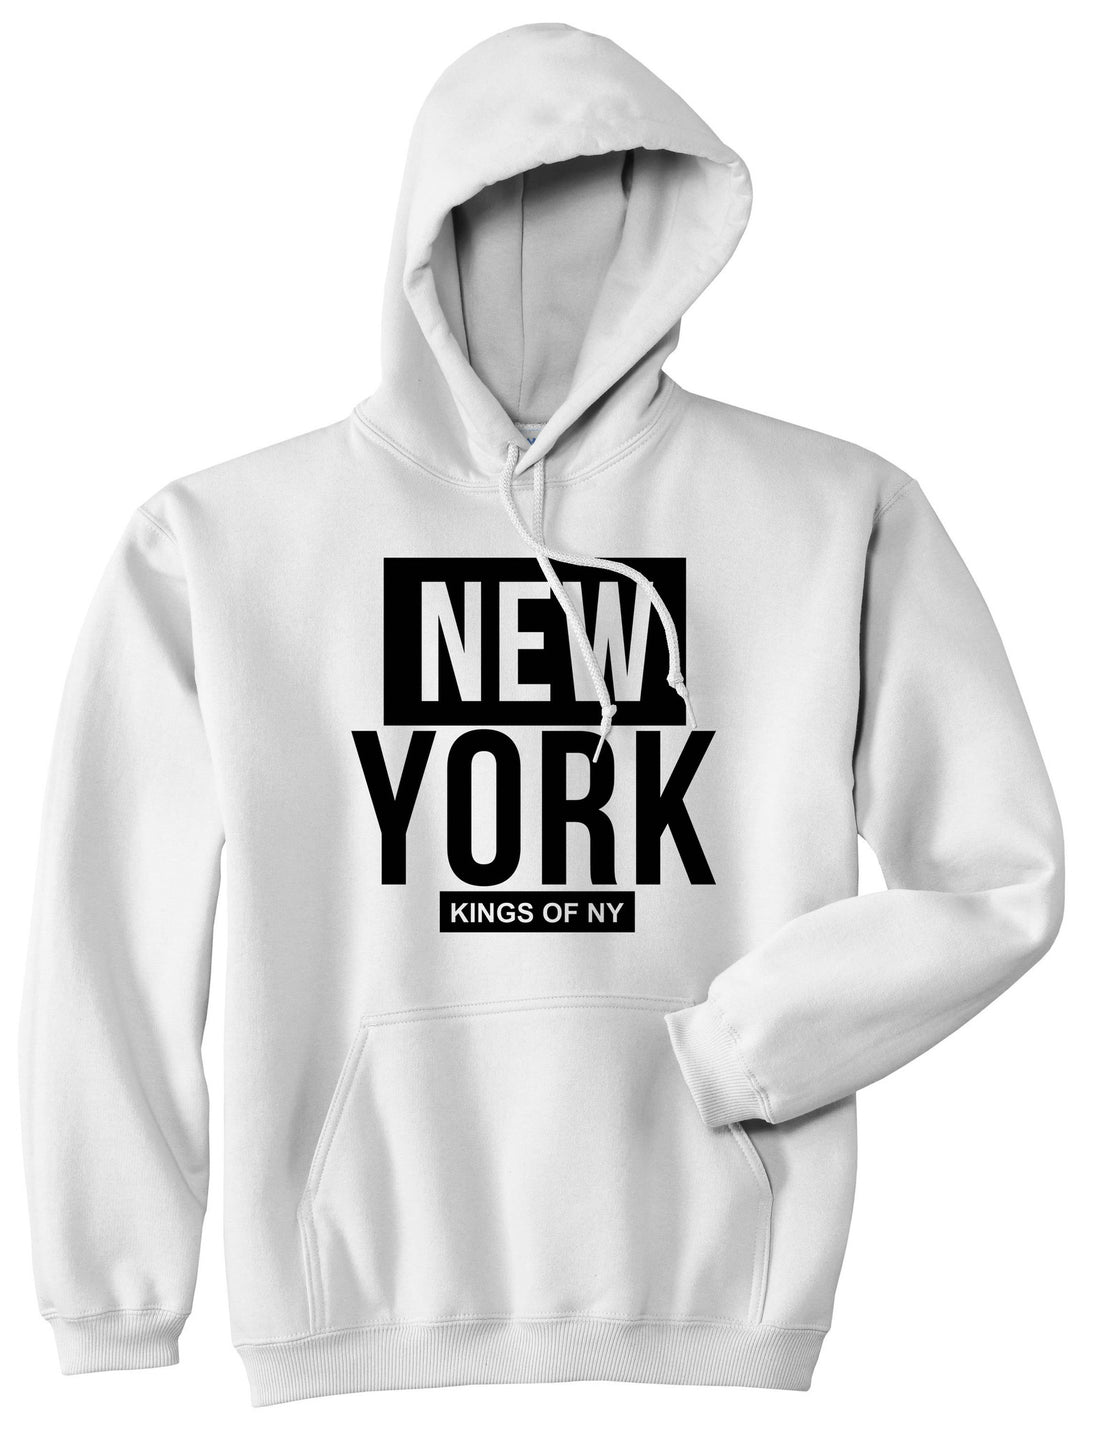 New York Block Box Pullover Hoodie Hoody in White by Kings Of NY